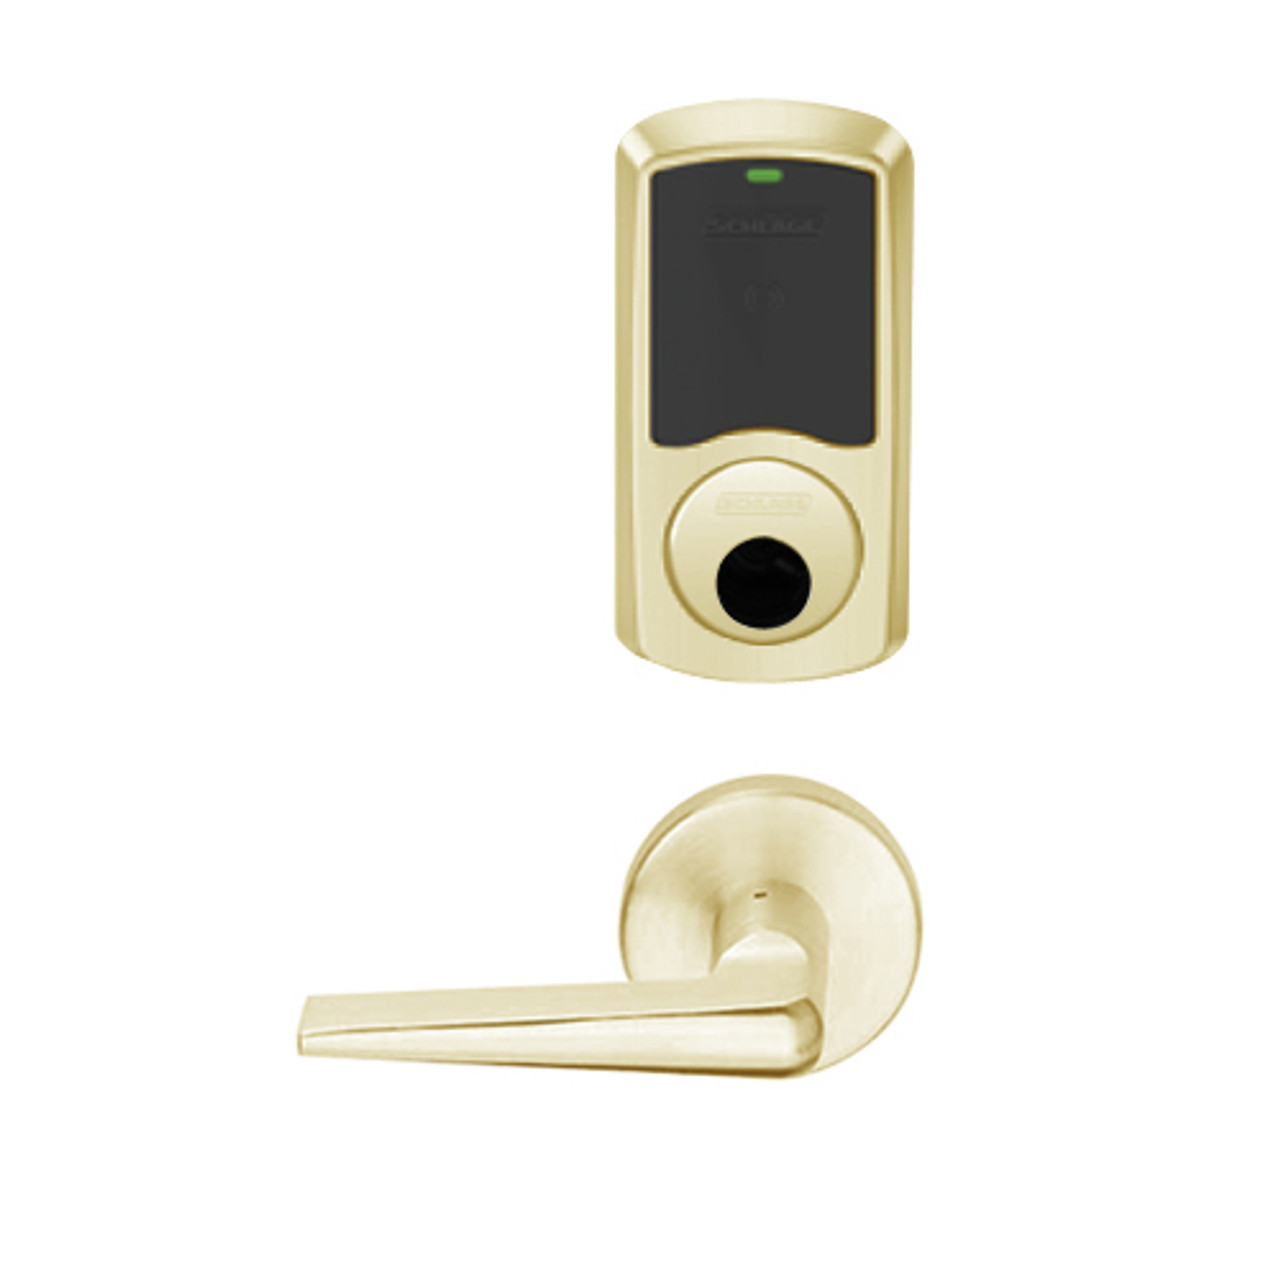 LEMB-GRW-L-05-606-00B Schlage Less Cylinder Privacy/Office Wireless Greenwich Mortise Lock with Push Button & LED Indicator and 05 Lever in Satin Brass